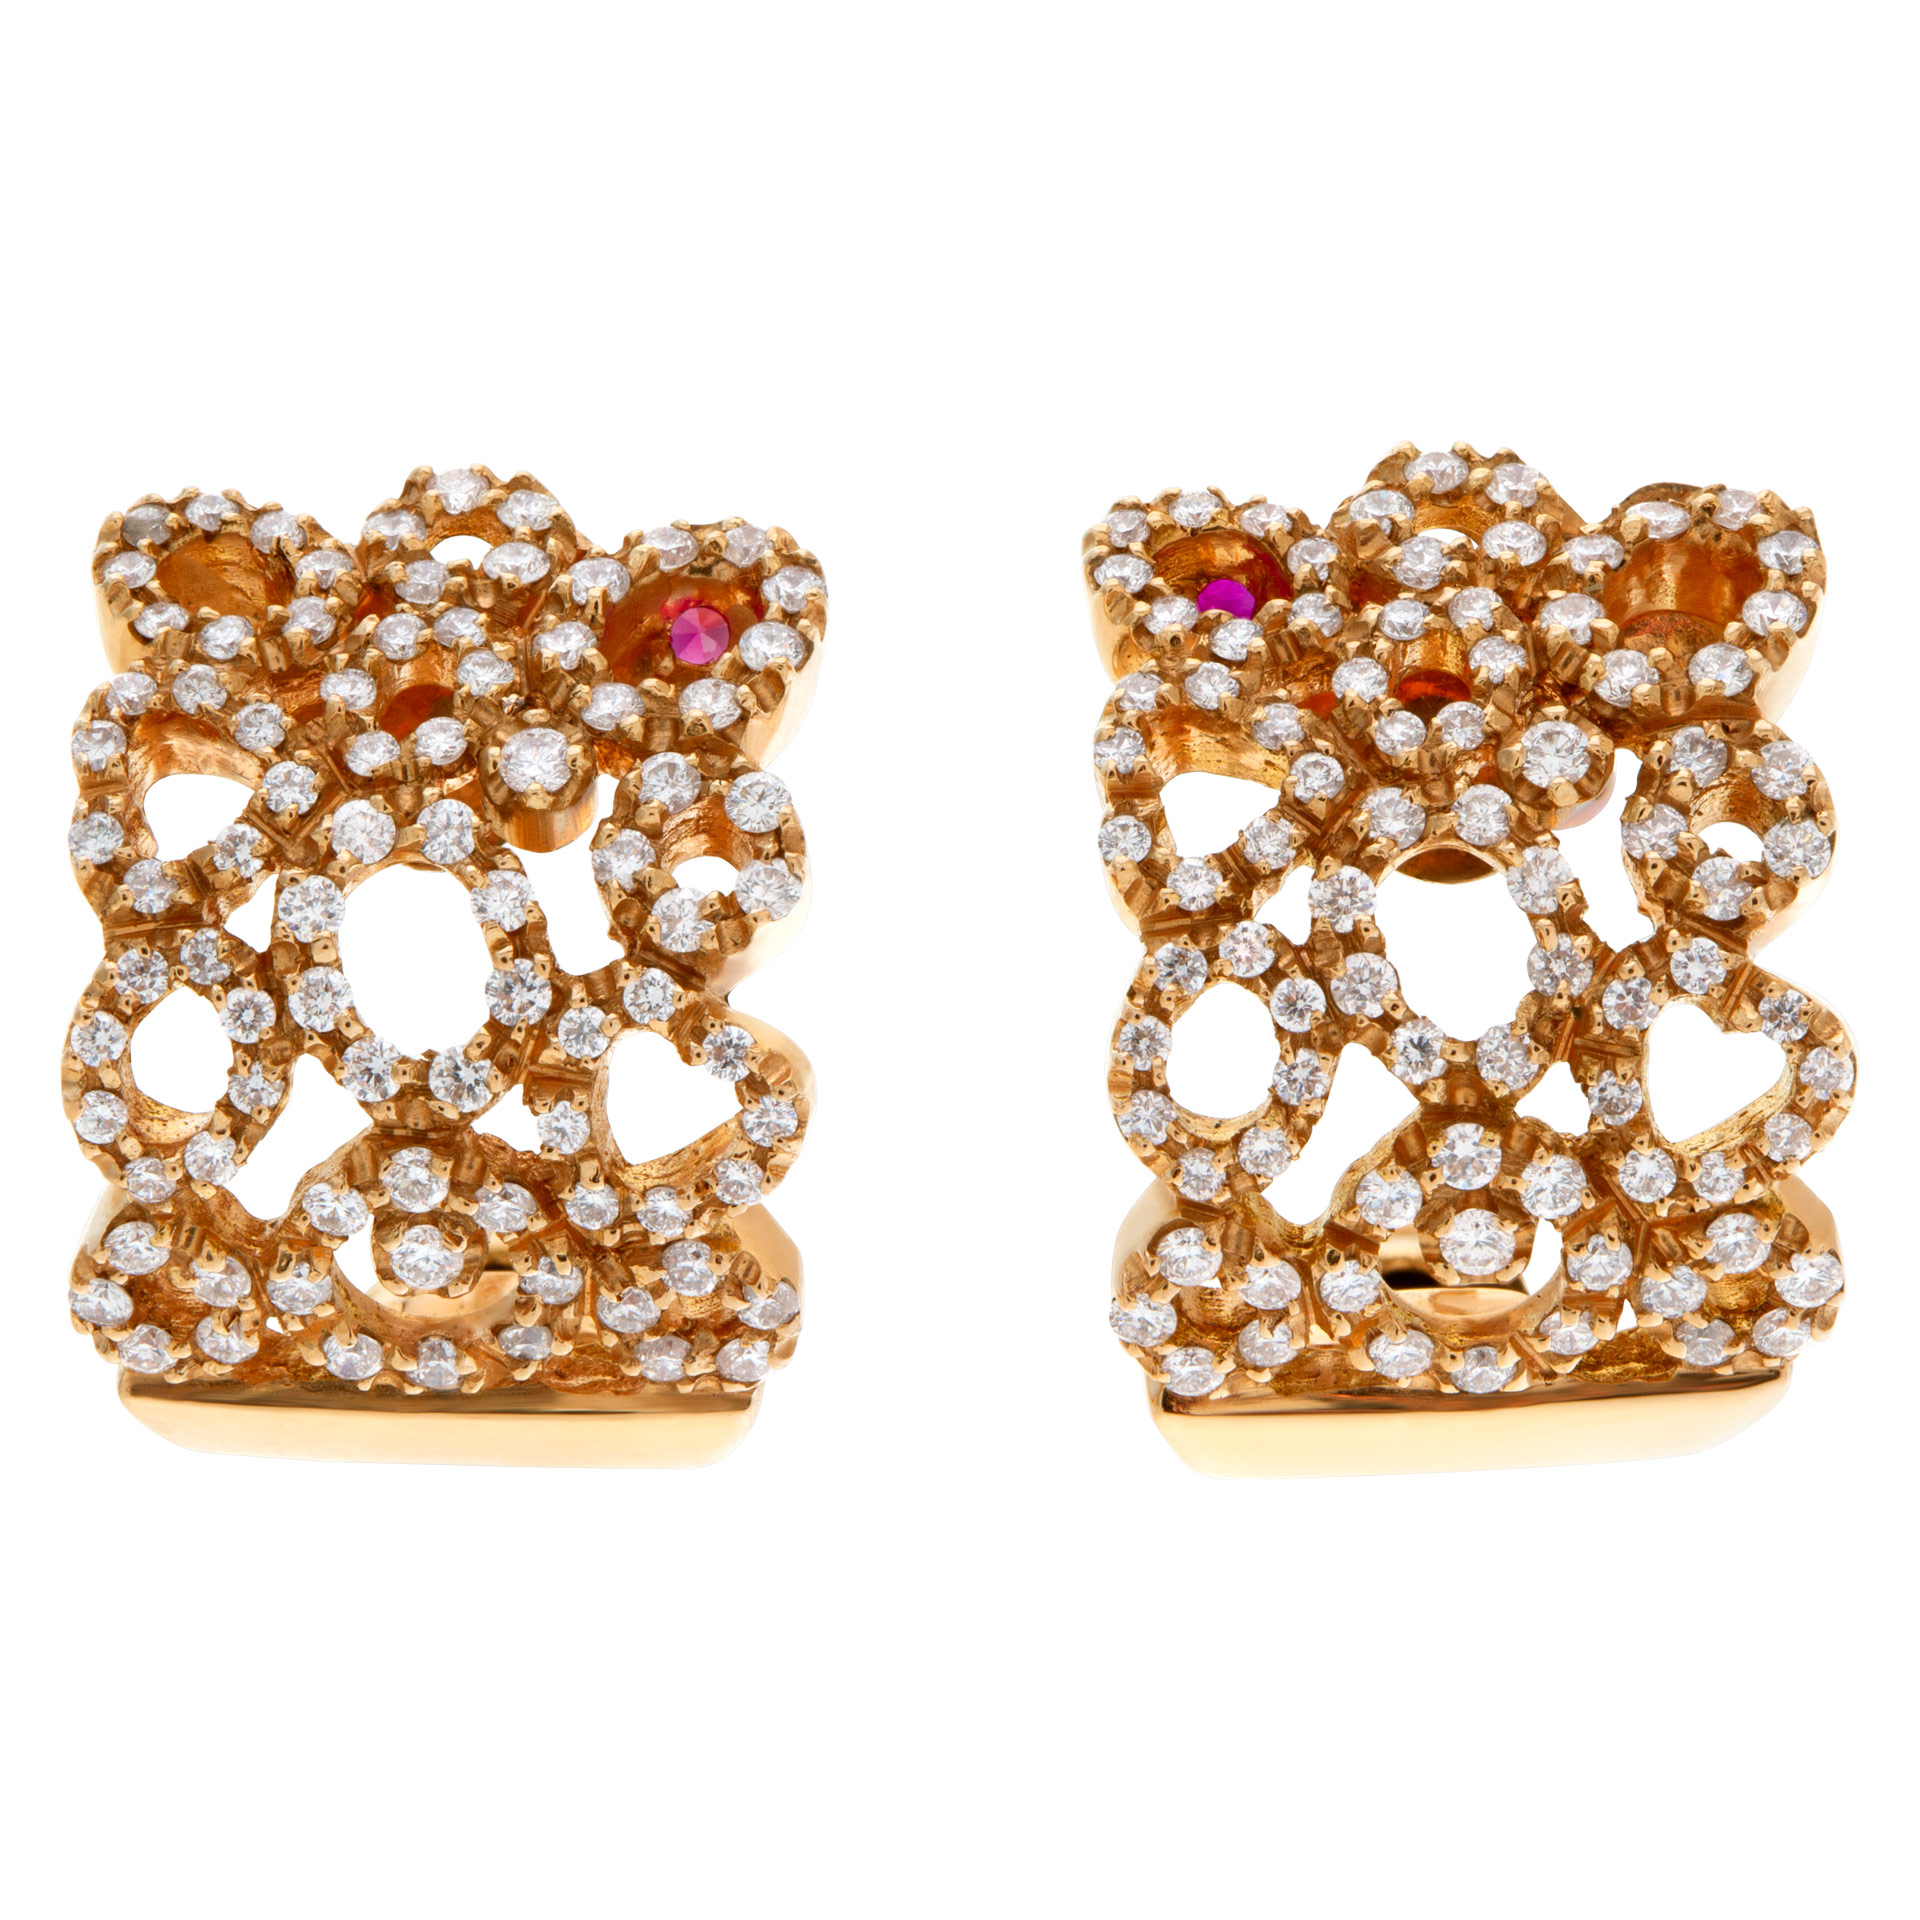 Roberto Coin Mauresque earrings in 18k rose gold with diamonds